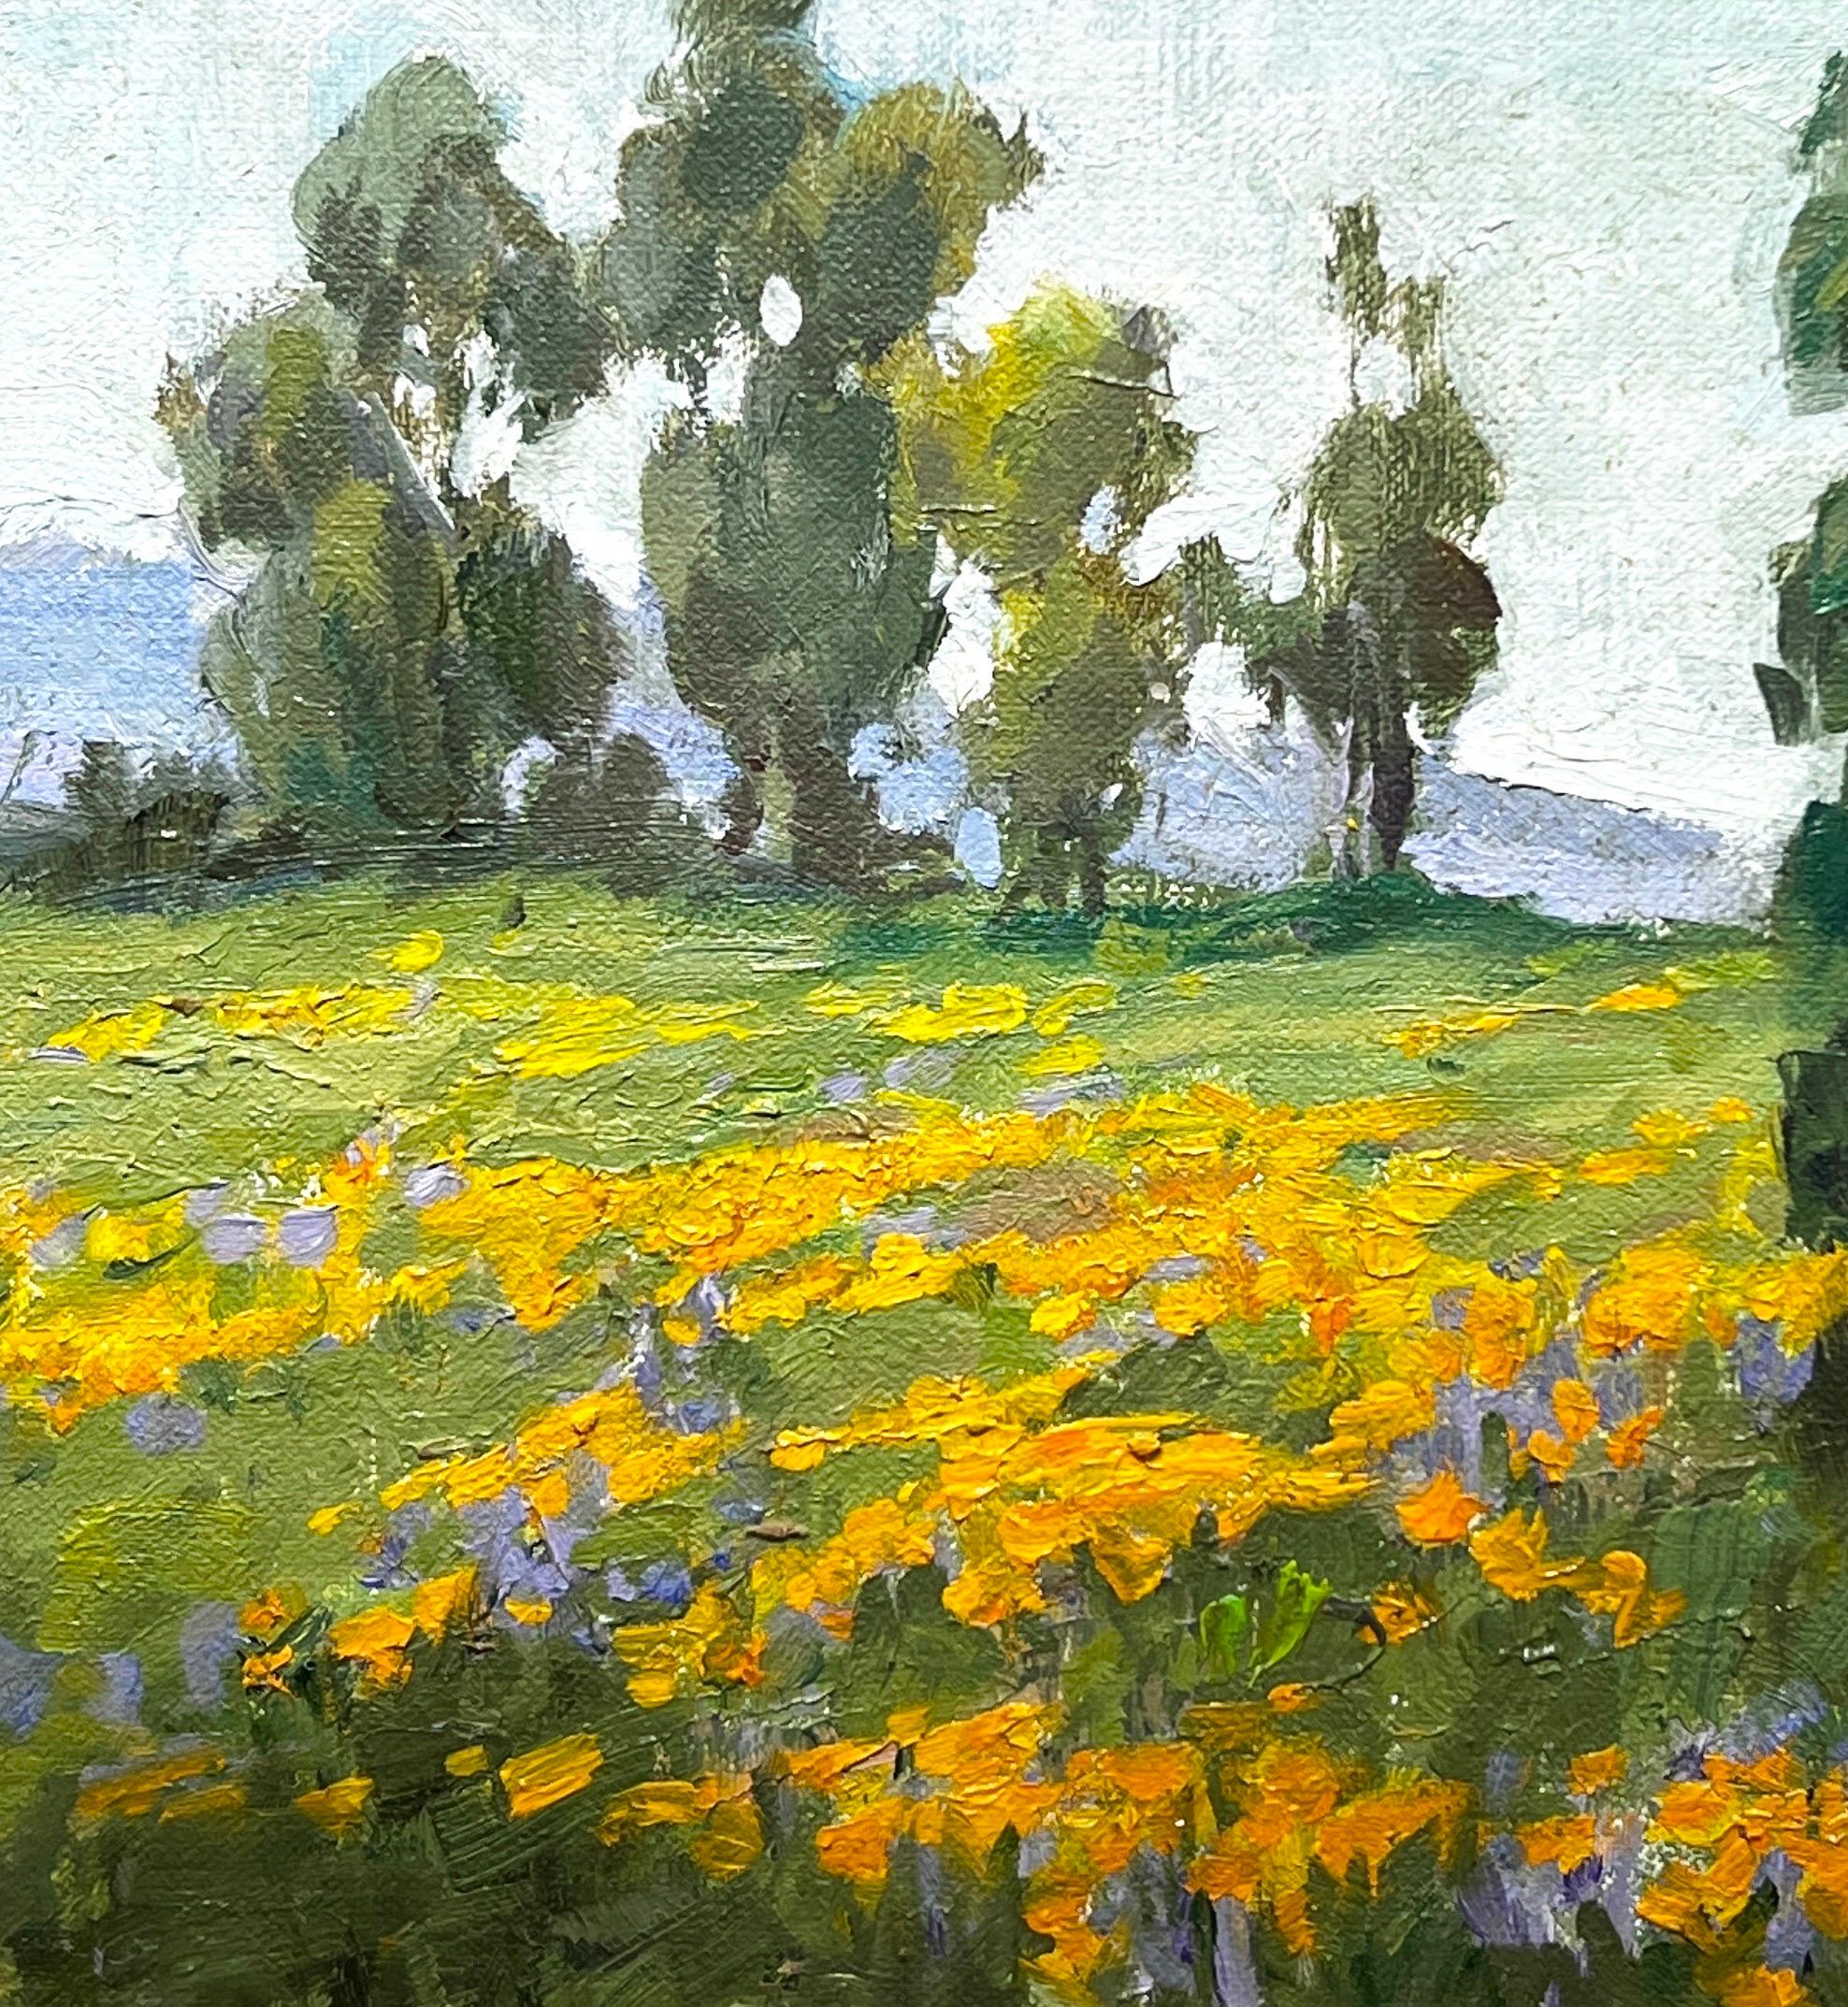 Lake Elsinore Poppies. - Impressionist Painting by Lynn Gertenbach